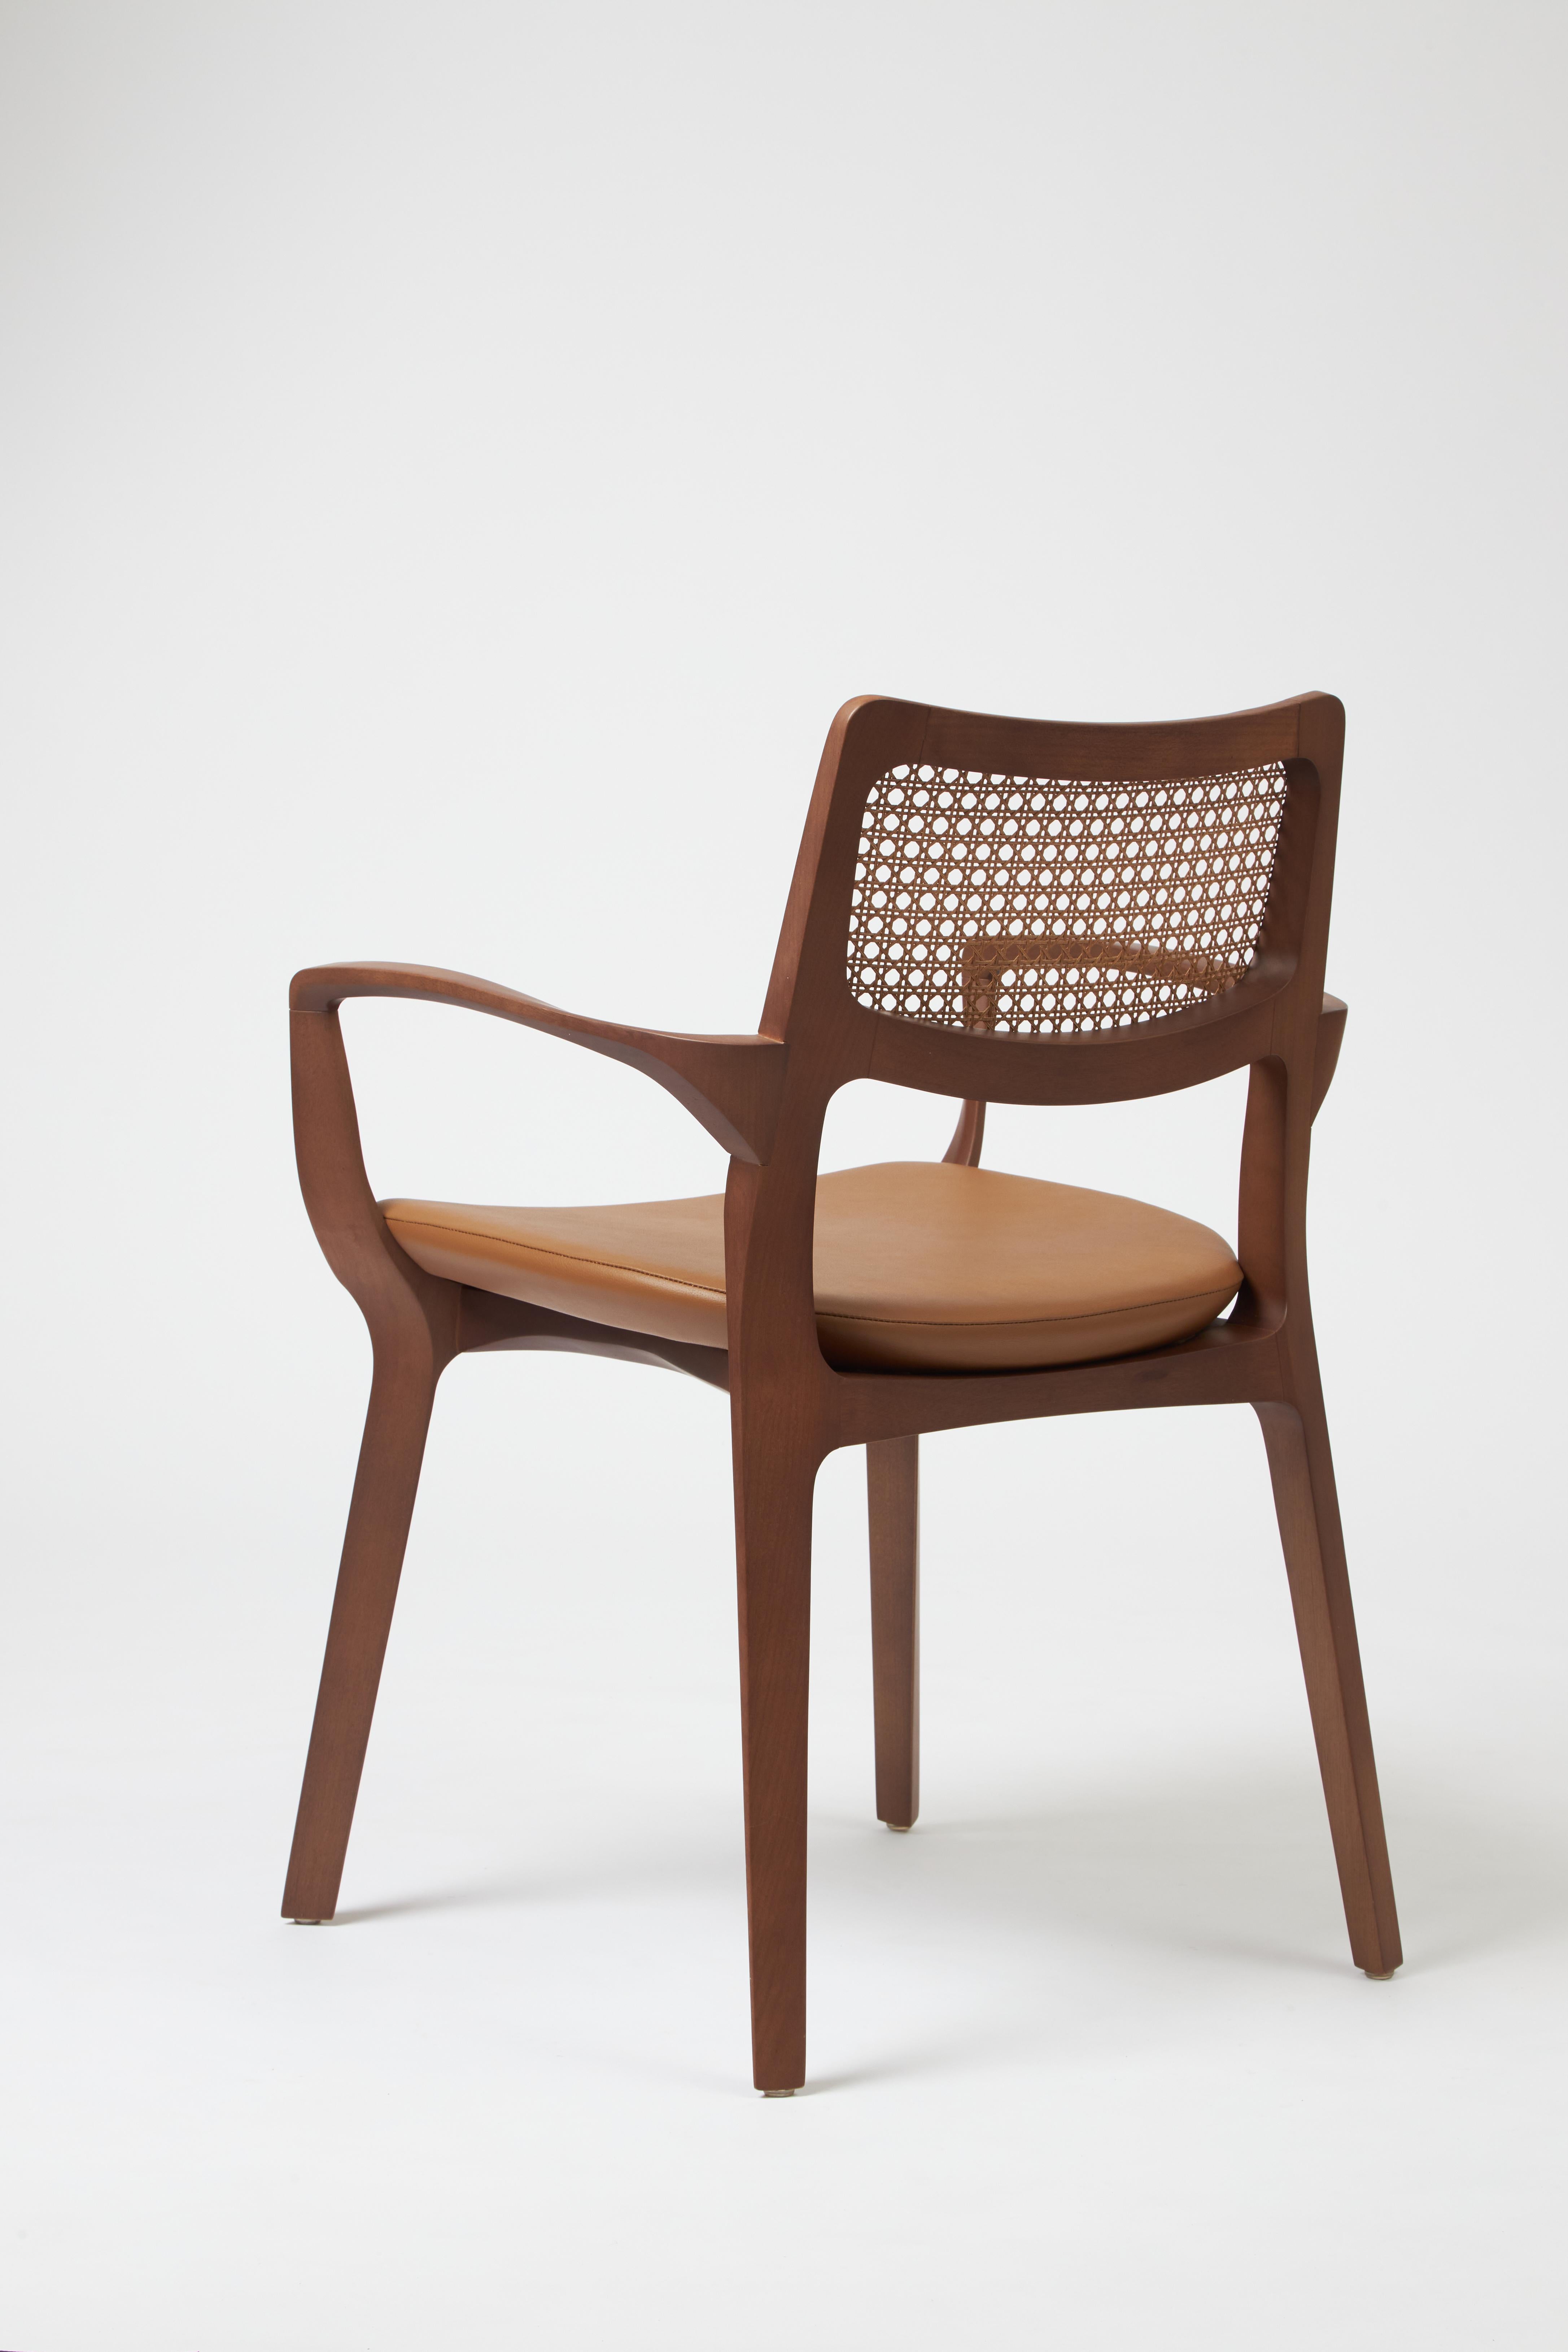 Vannerie The Moderns Aurora Chair Sculptured in Walnut Finish Arms, leather seating, cane en vente